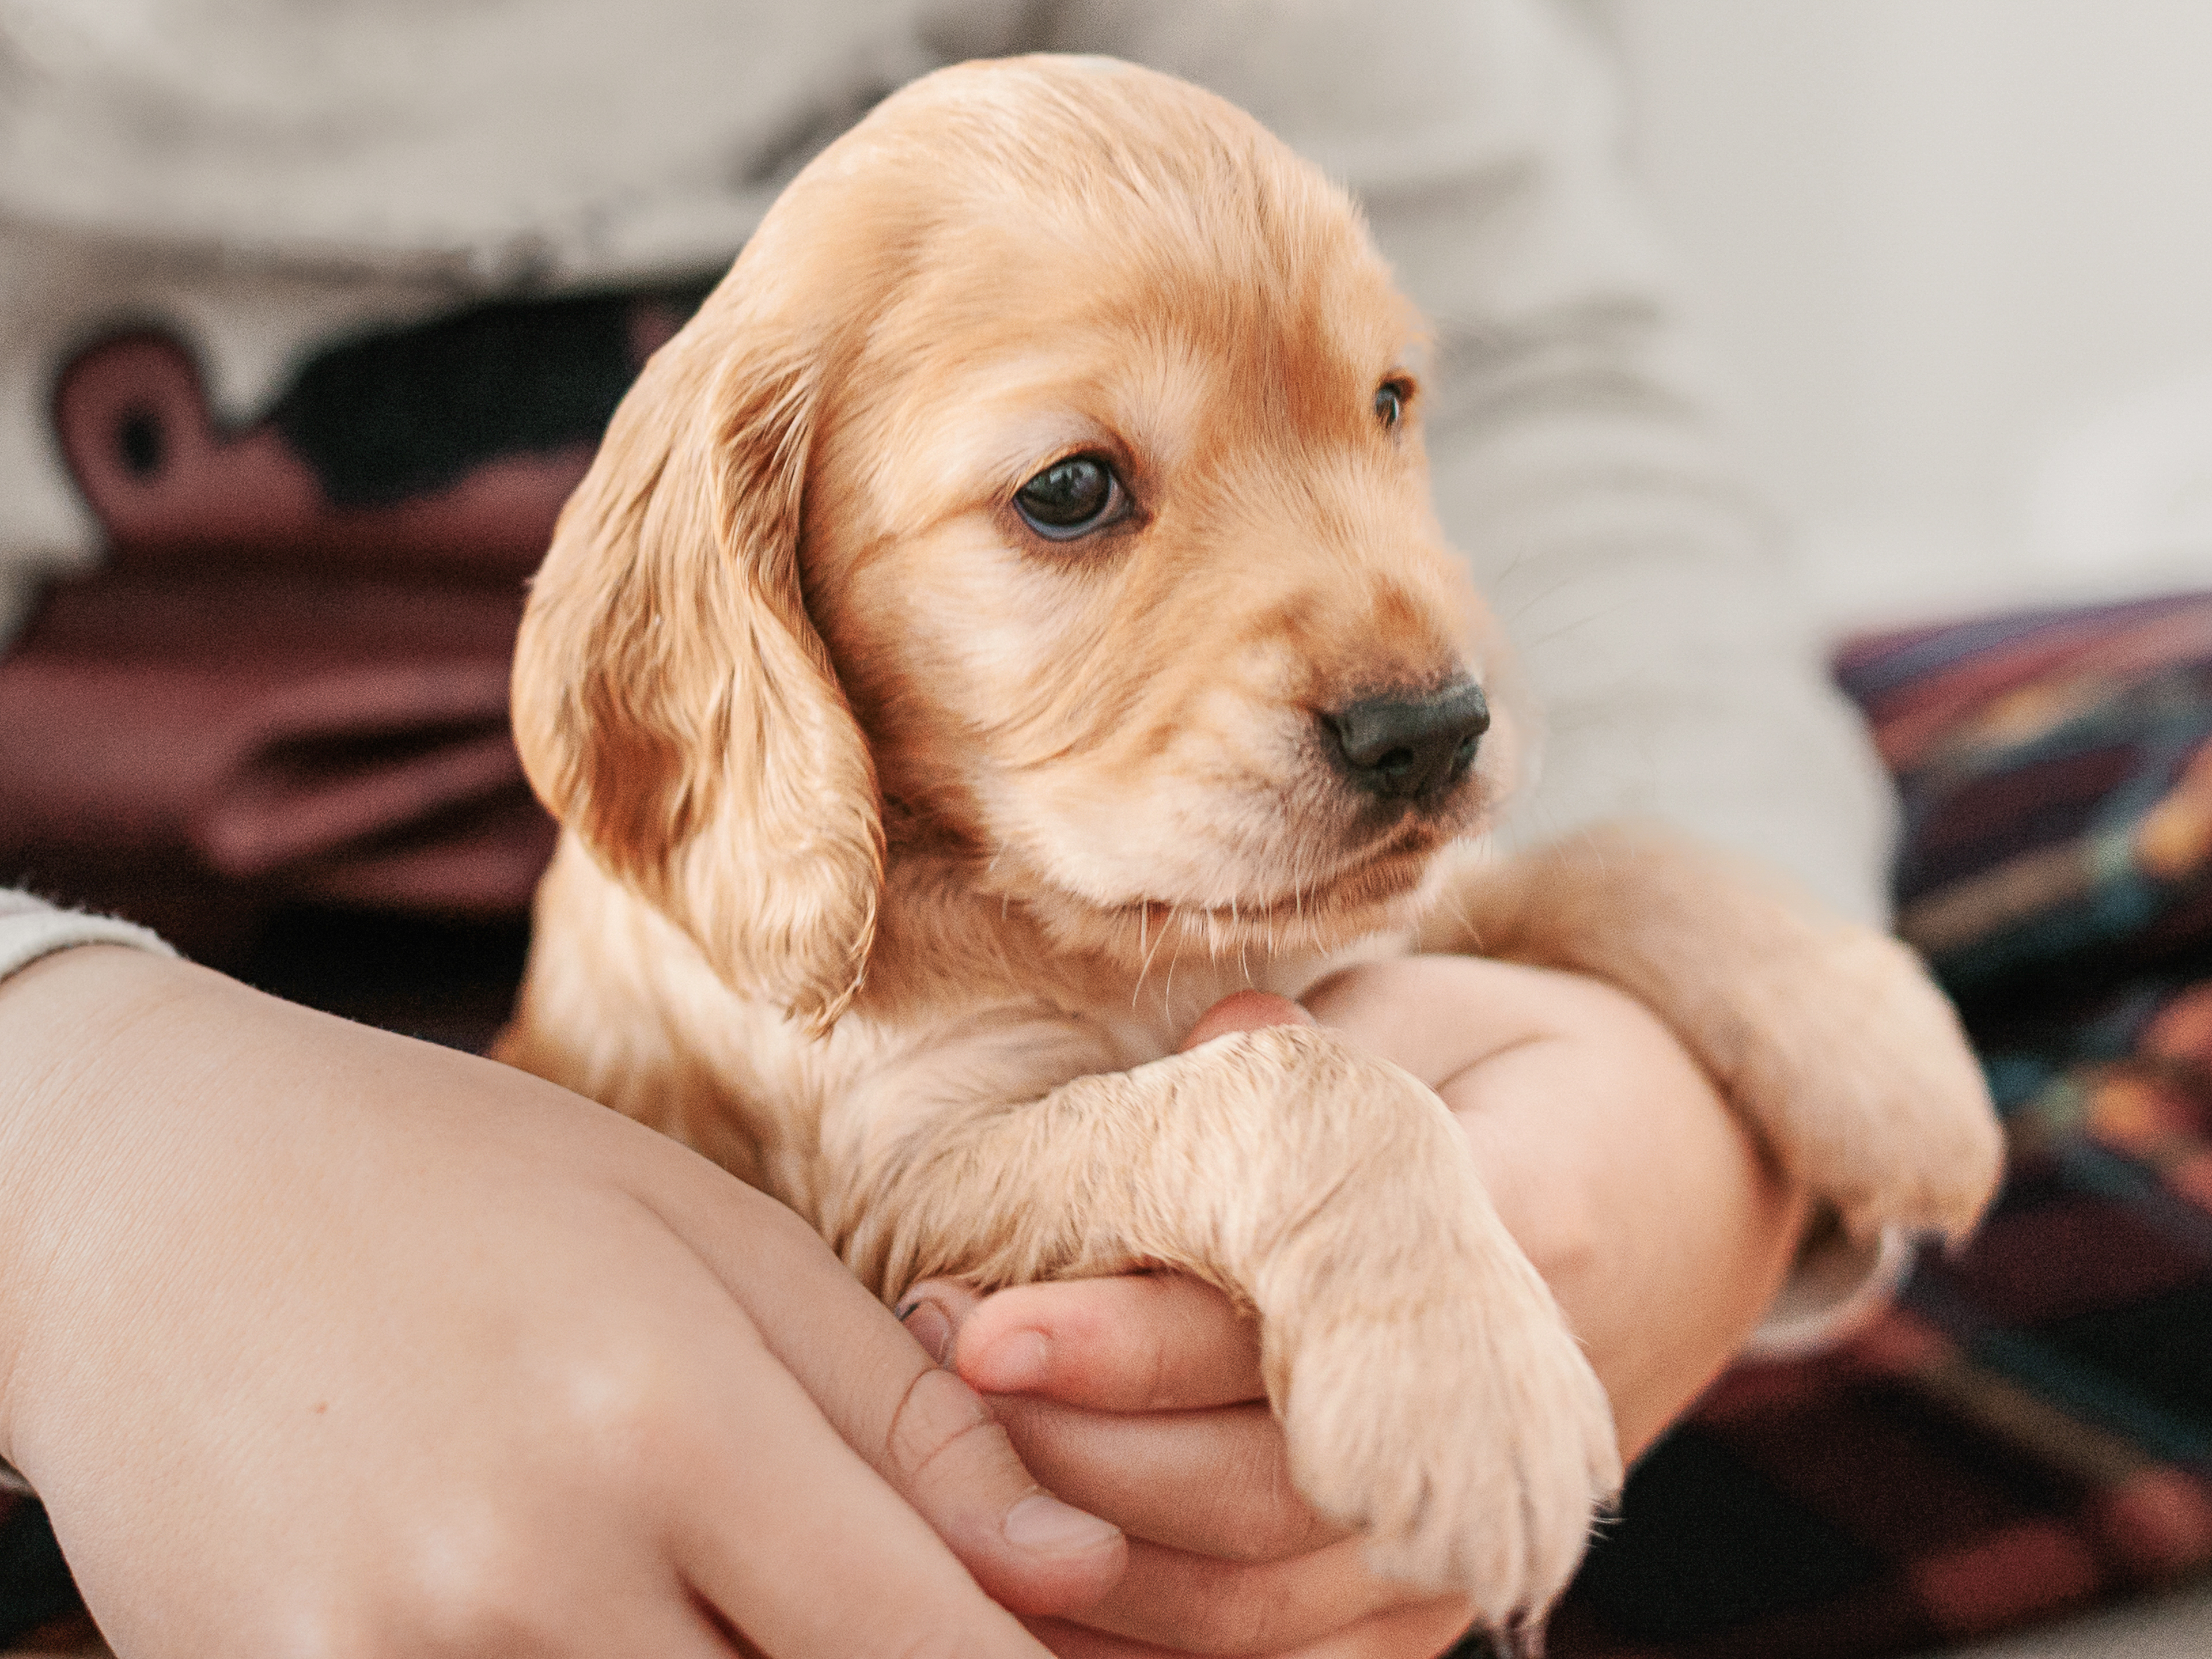 English Cocker Spaniel puppy being held by a young boy